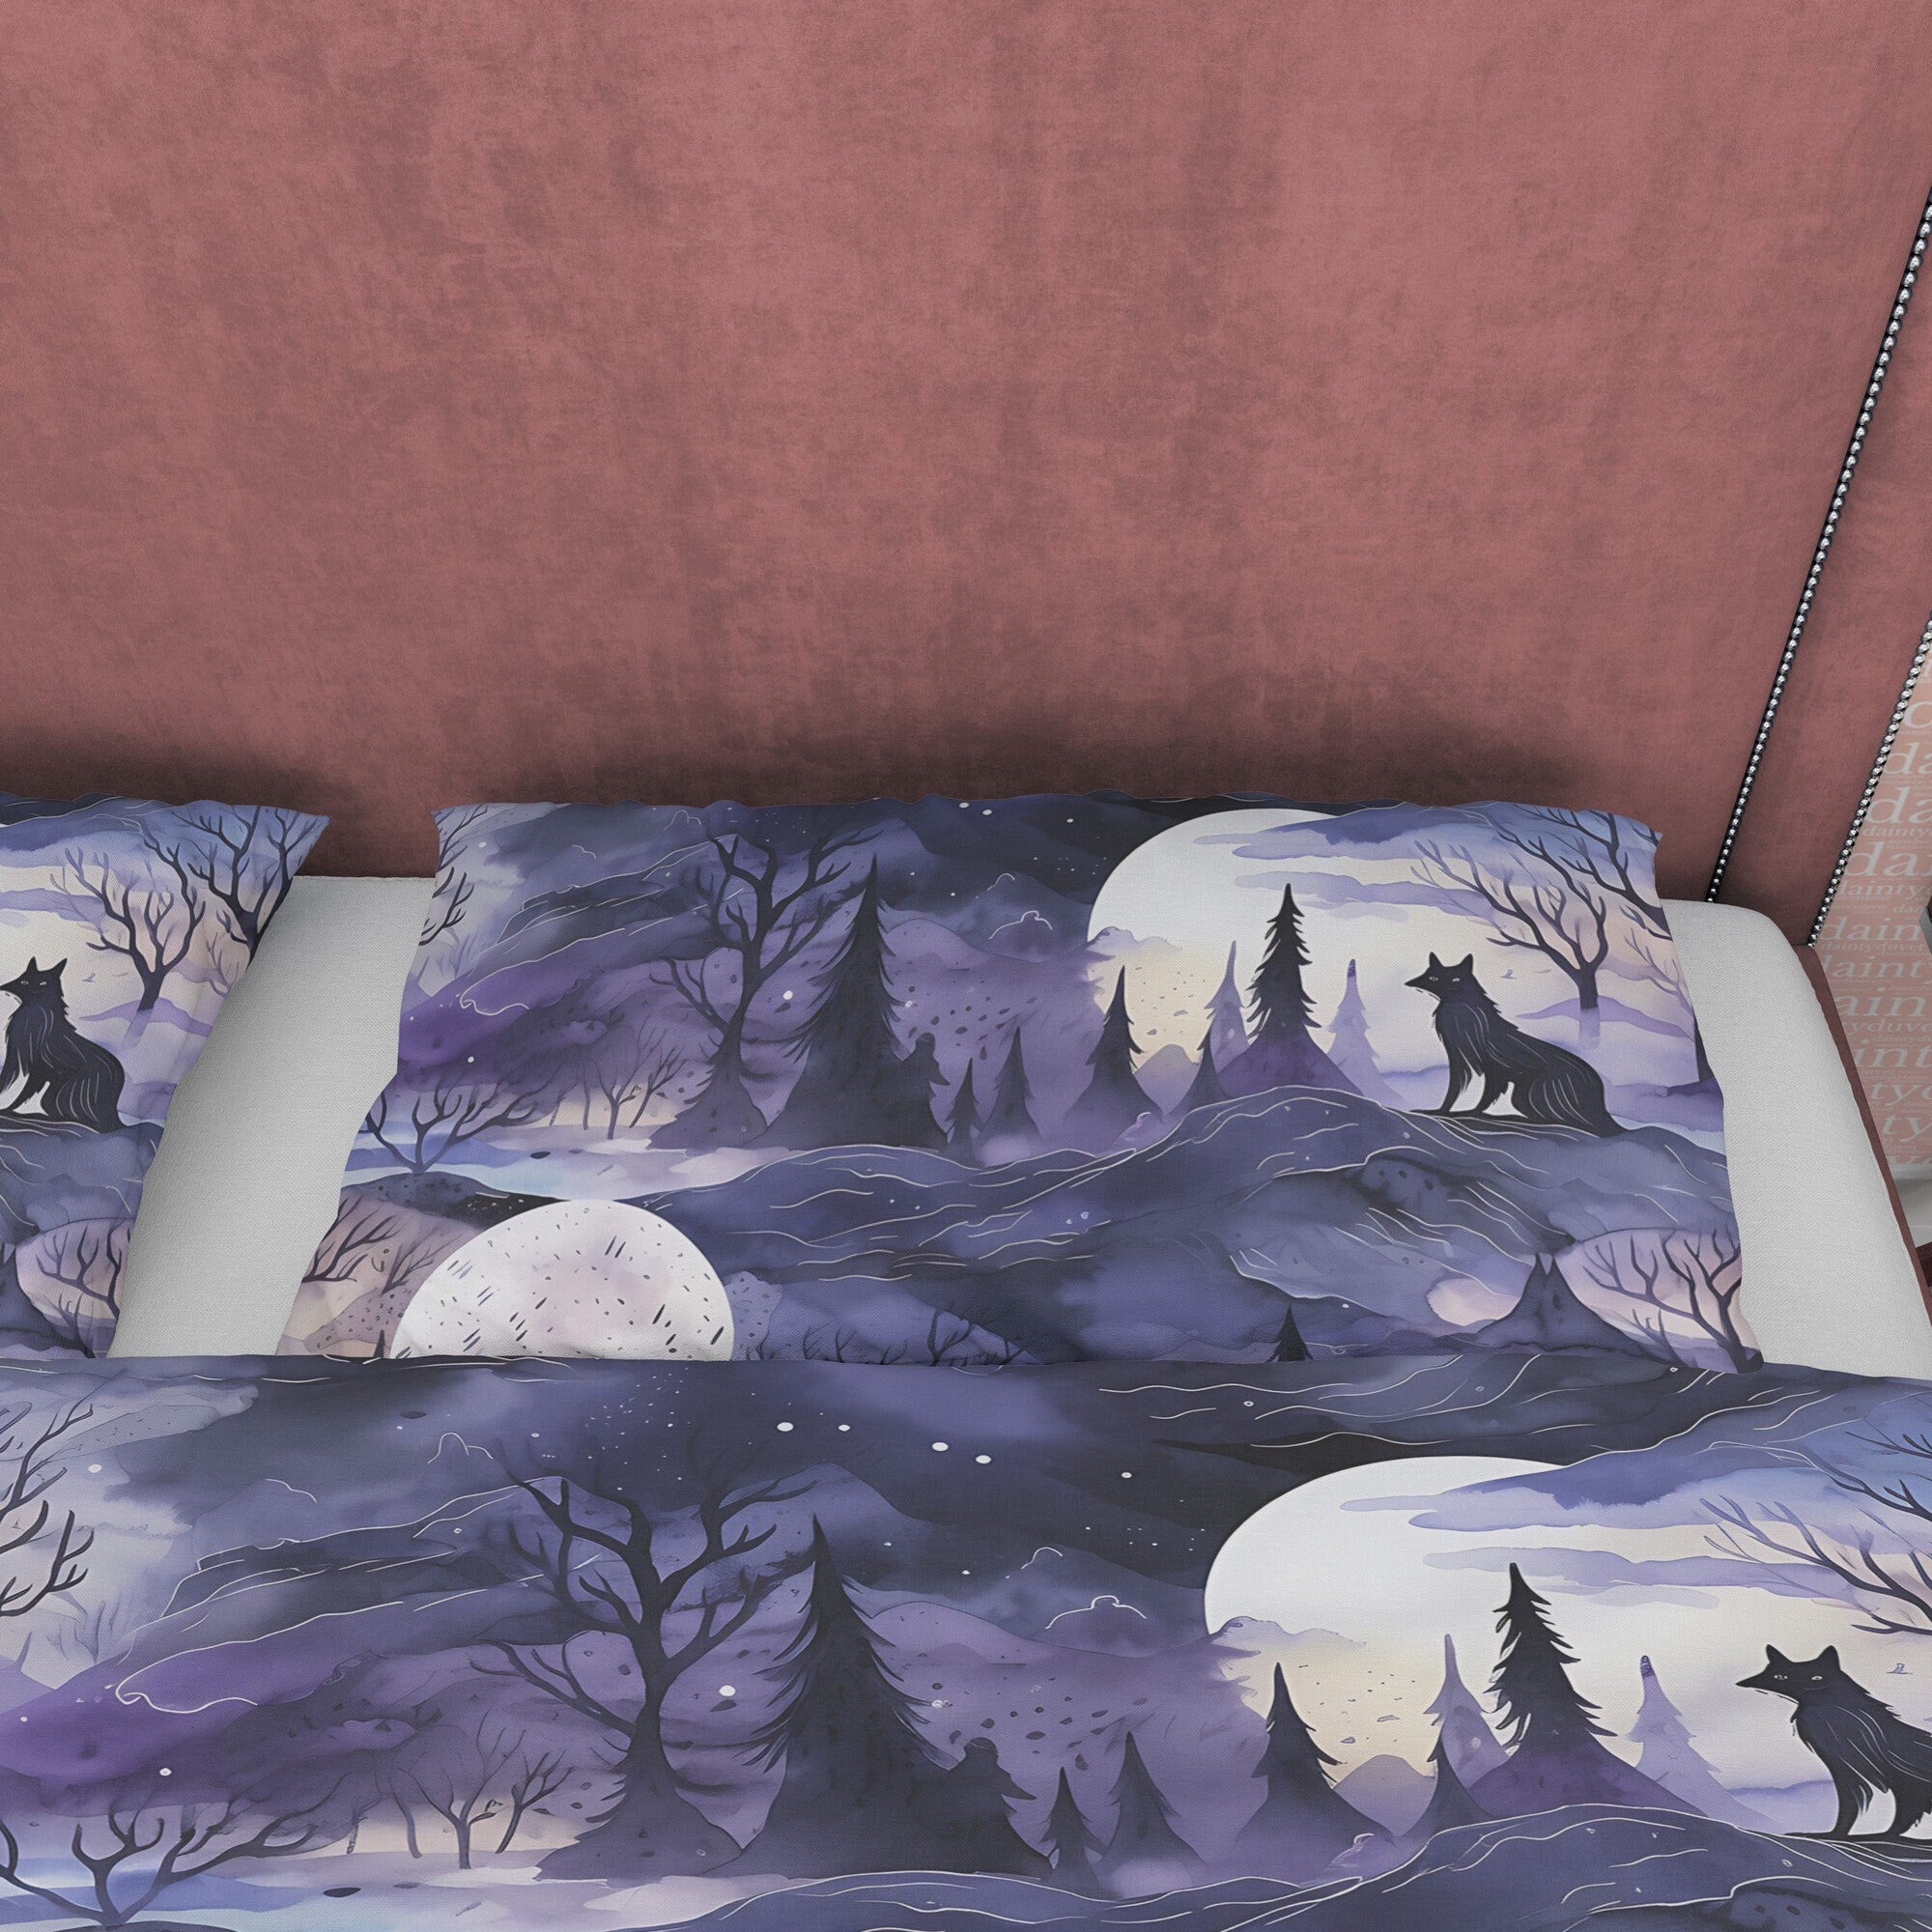 Full Moon Scary Midnight Duvet Cover Set, Haunted Forest Quilt Cover Aesthetic Zipper Bedding, Halloween Room Decor, Purple Blanket Cover